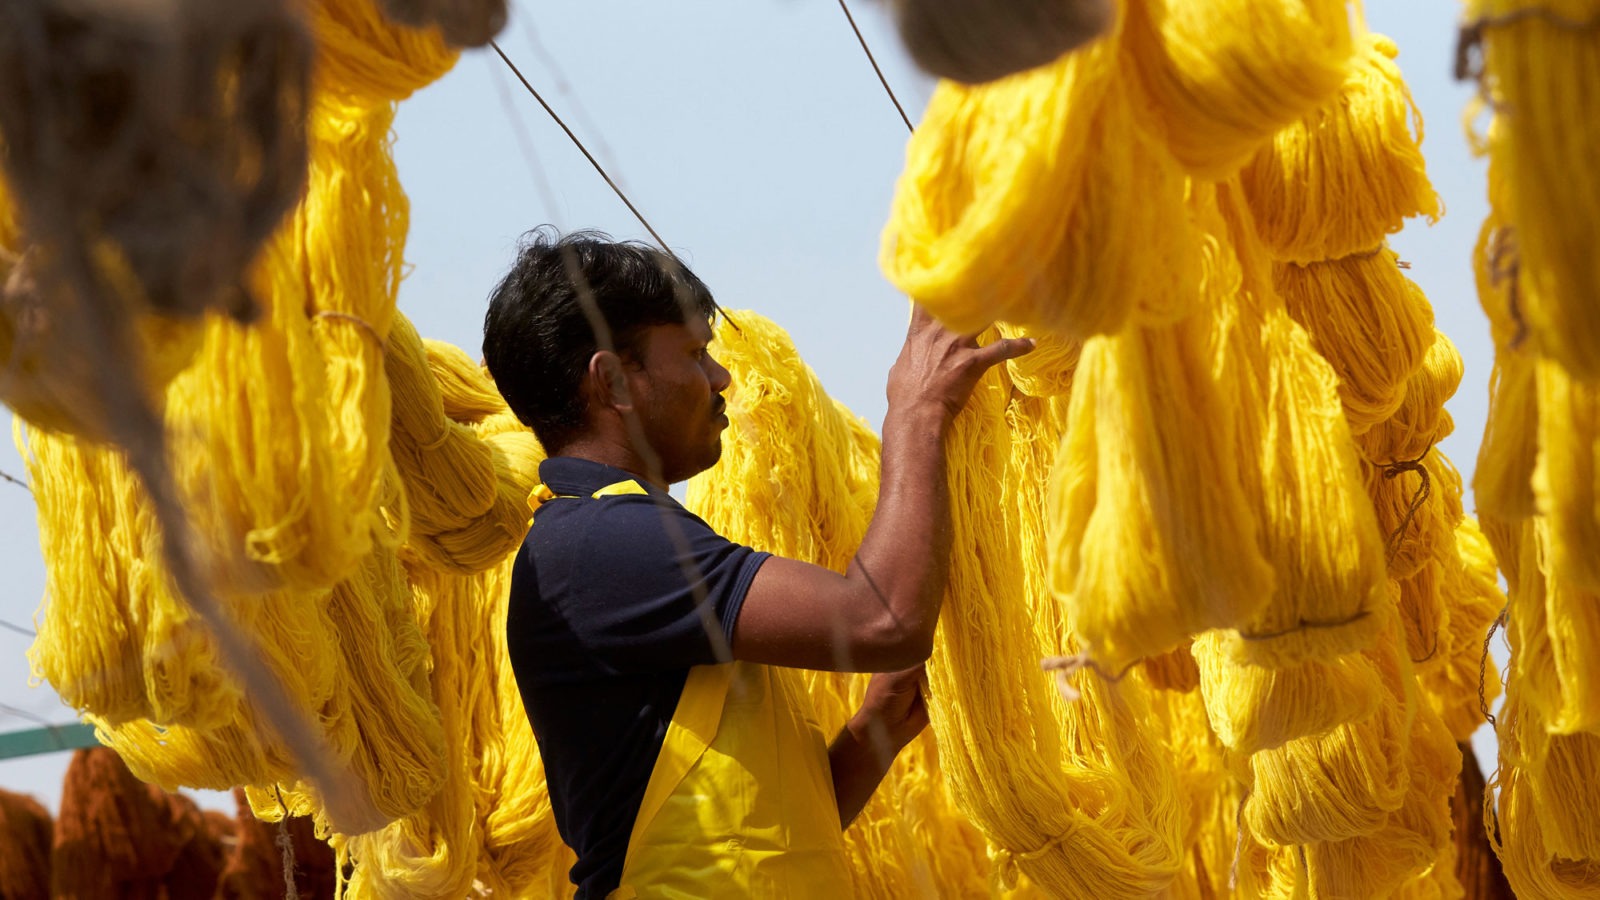 Man arranging big balls of newly yellow dyed cotton fibres on clothing lines, under a blue sky.